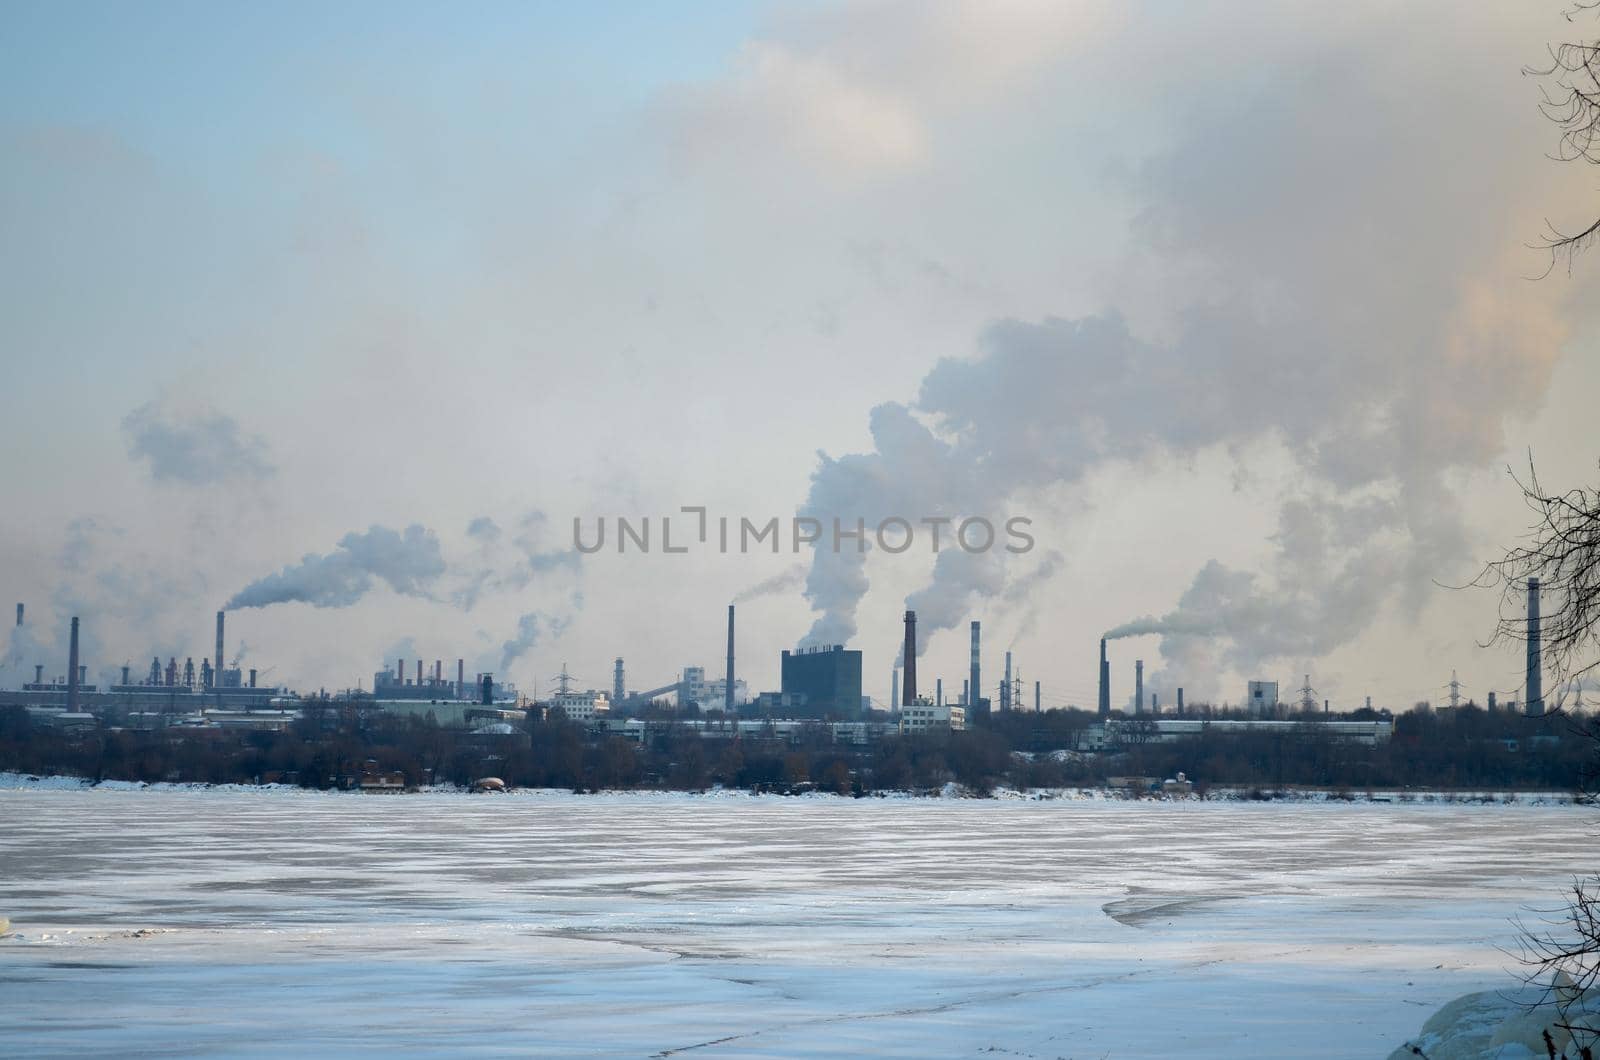 Plants and factories with smoke from chimneys. Air pollution concept. Industrial city, smoking plant, frozen river